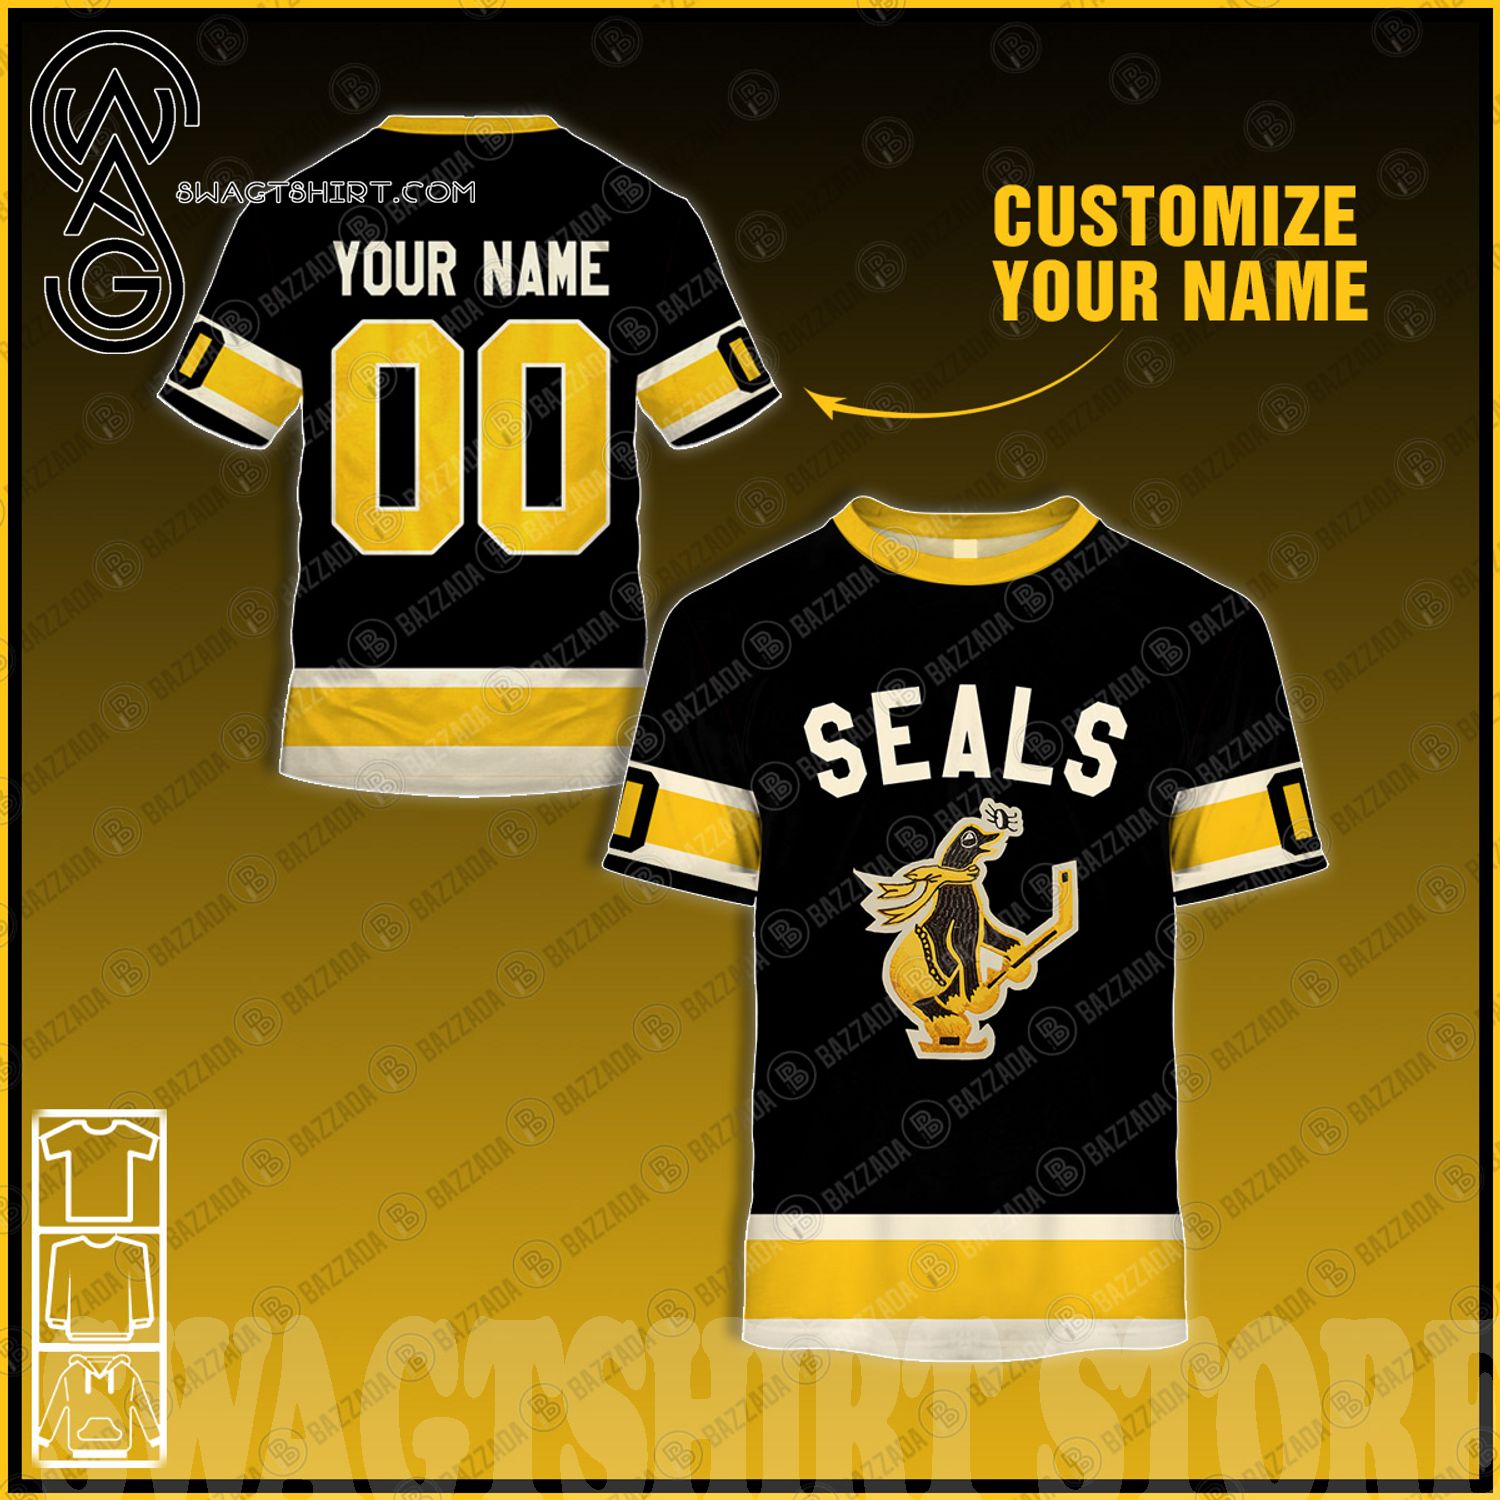 Best Selling Product] Personalize Name and Number San Francisco Seals  Yellow Hockey jersey WHL1661 1966 Full Printed Shirt